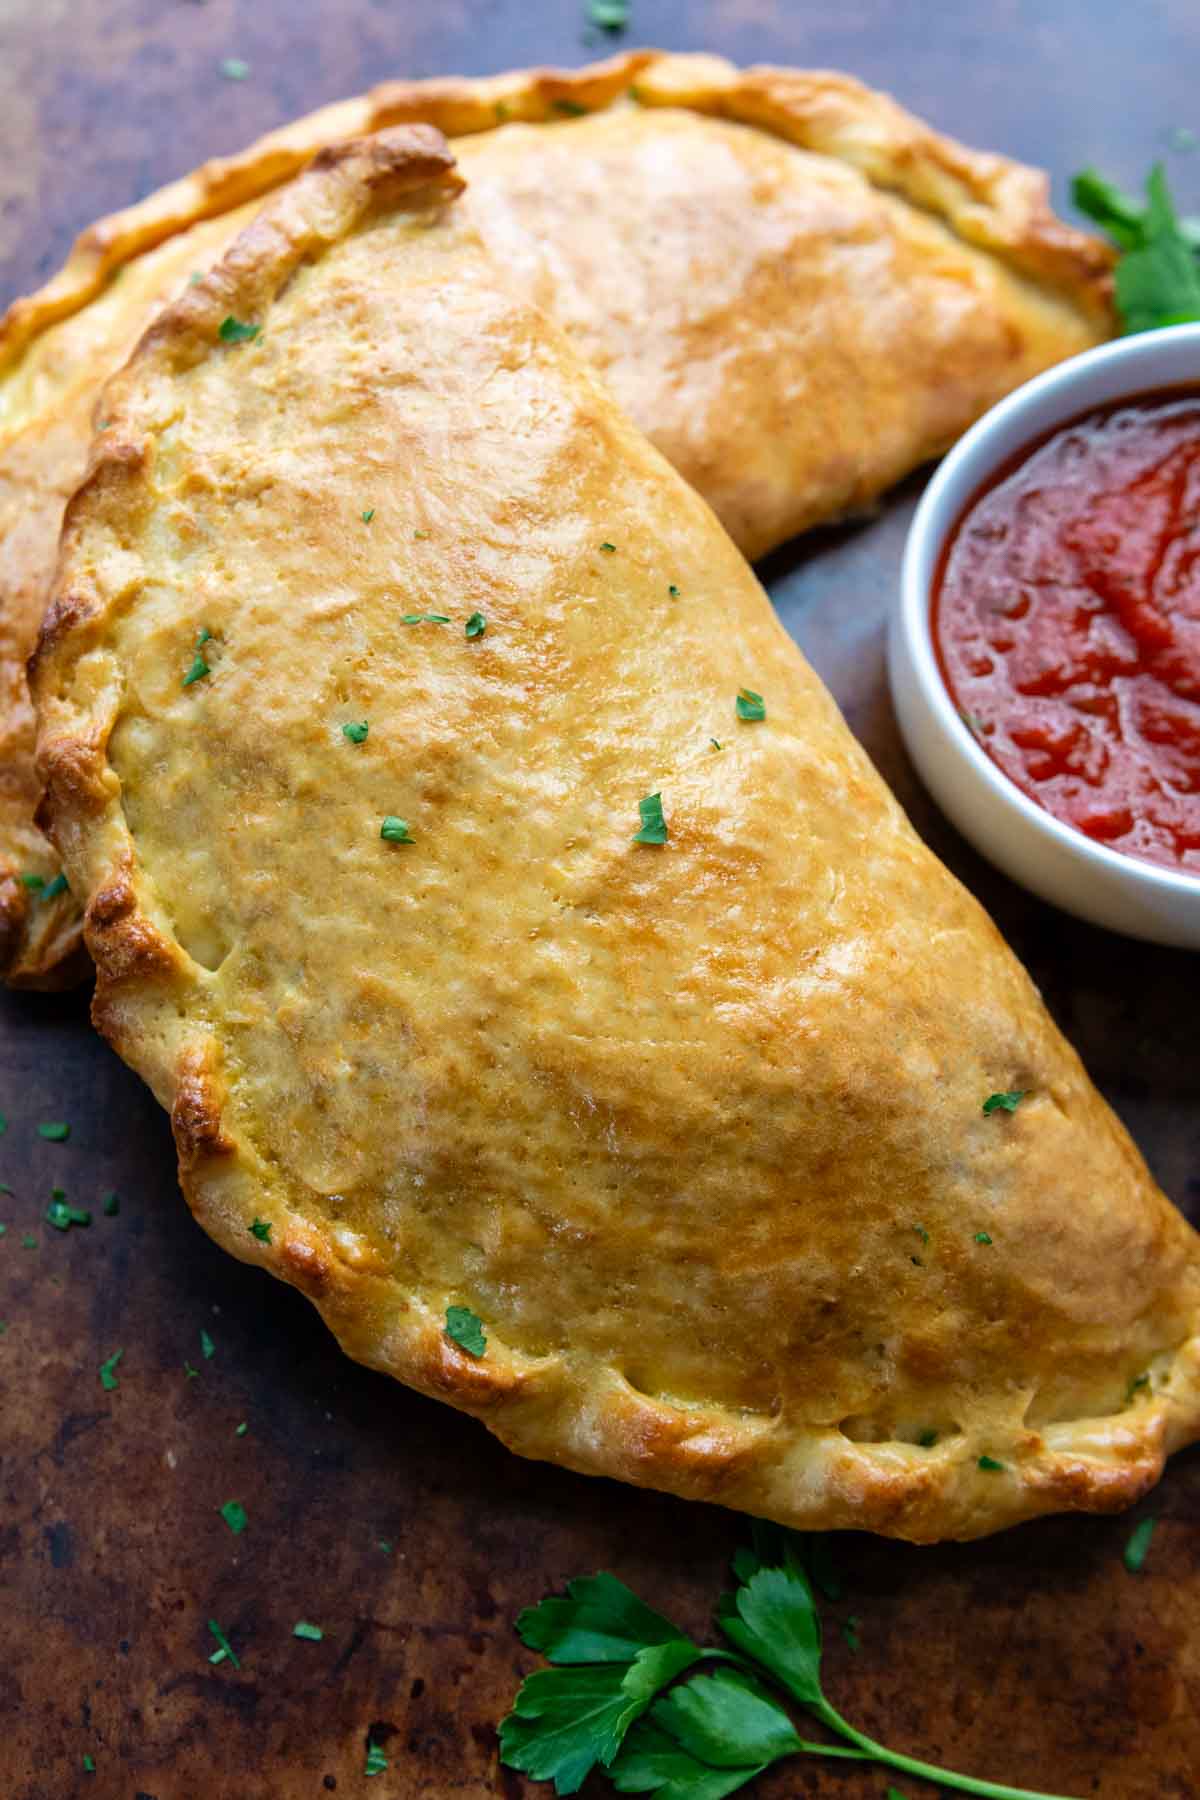 a baked calzone with a dish of pizza sauce next to it.